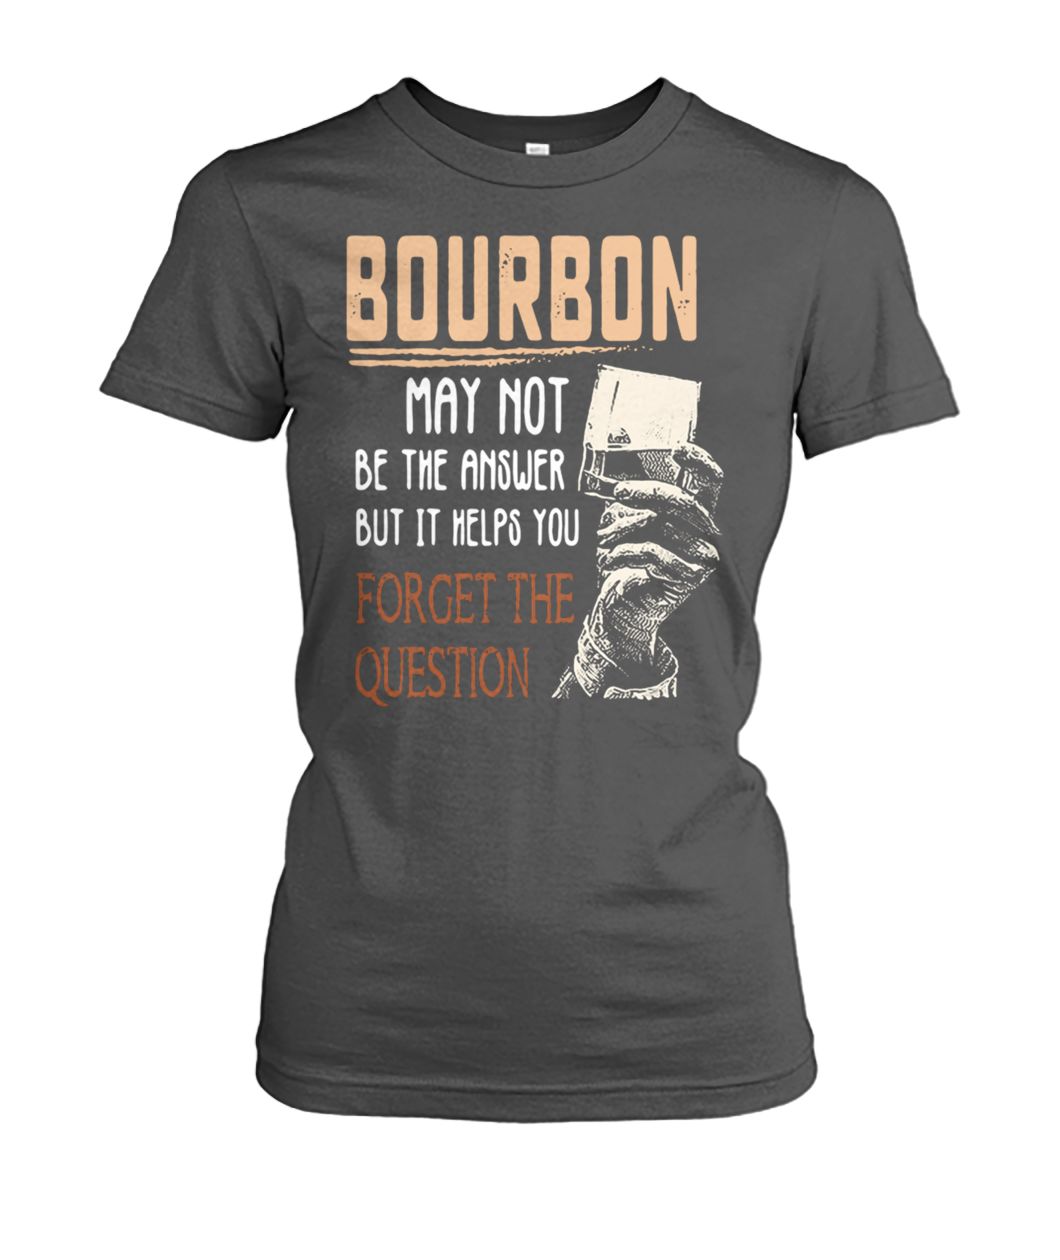 Bourbon may not be the answer but it helps you forget the question women's crew tee